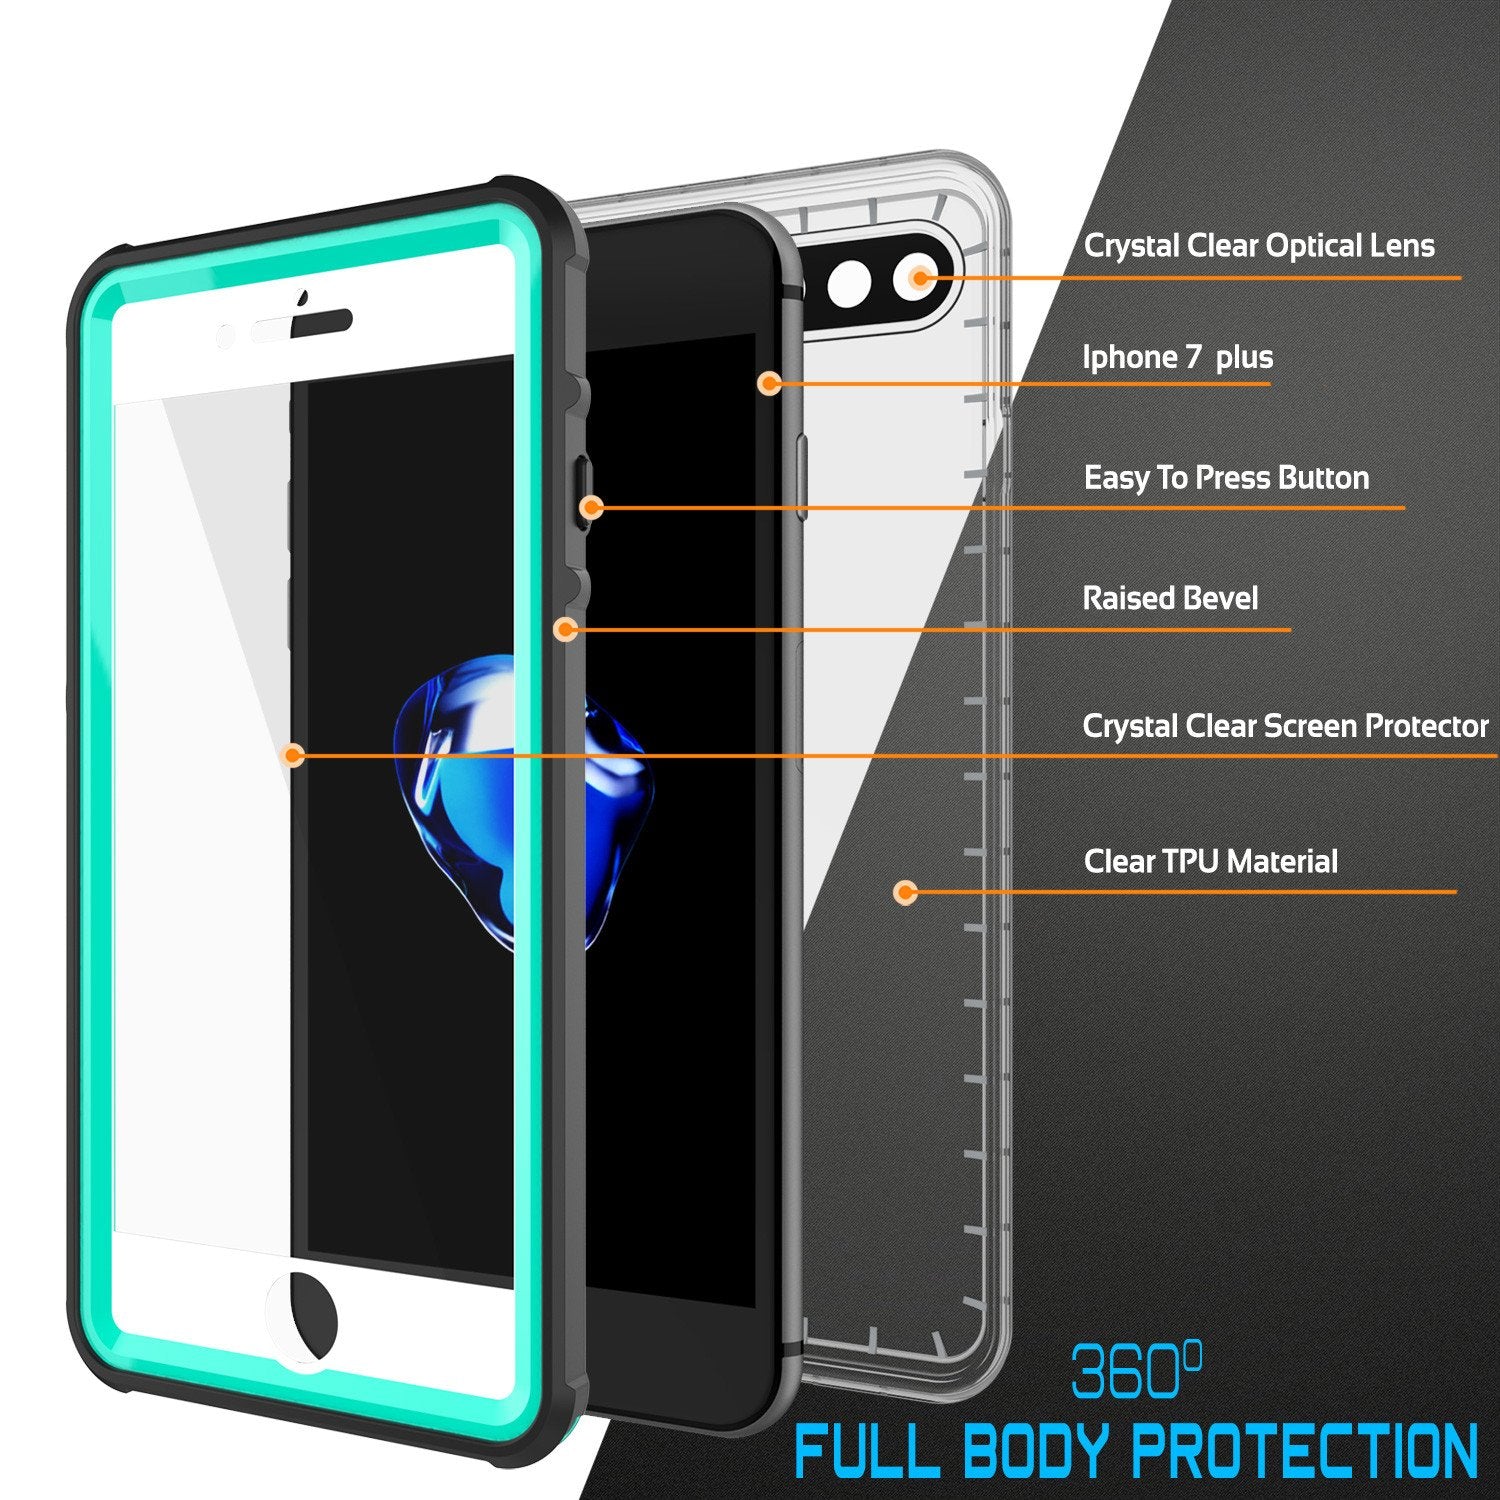 iPhone 7+ Plus Waterproof Case, PUNKcase CRYSTAL Teal W/ Attached Screen Protector  | Warranty - PunkCase NZ